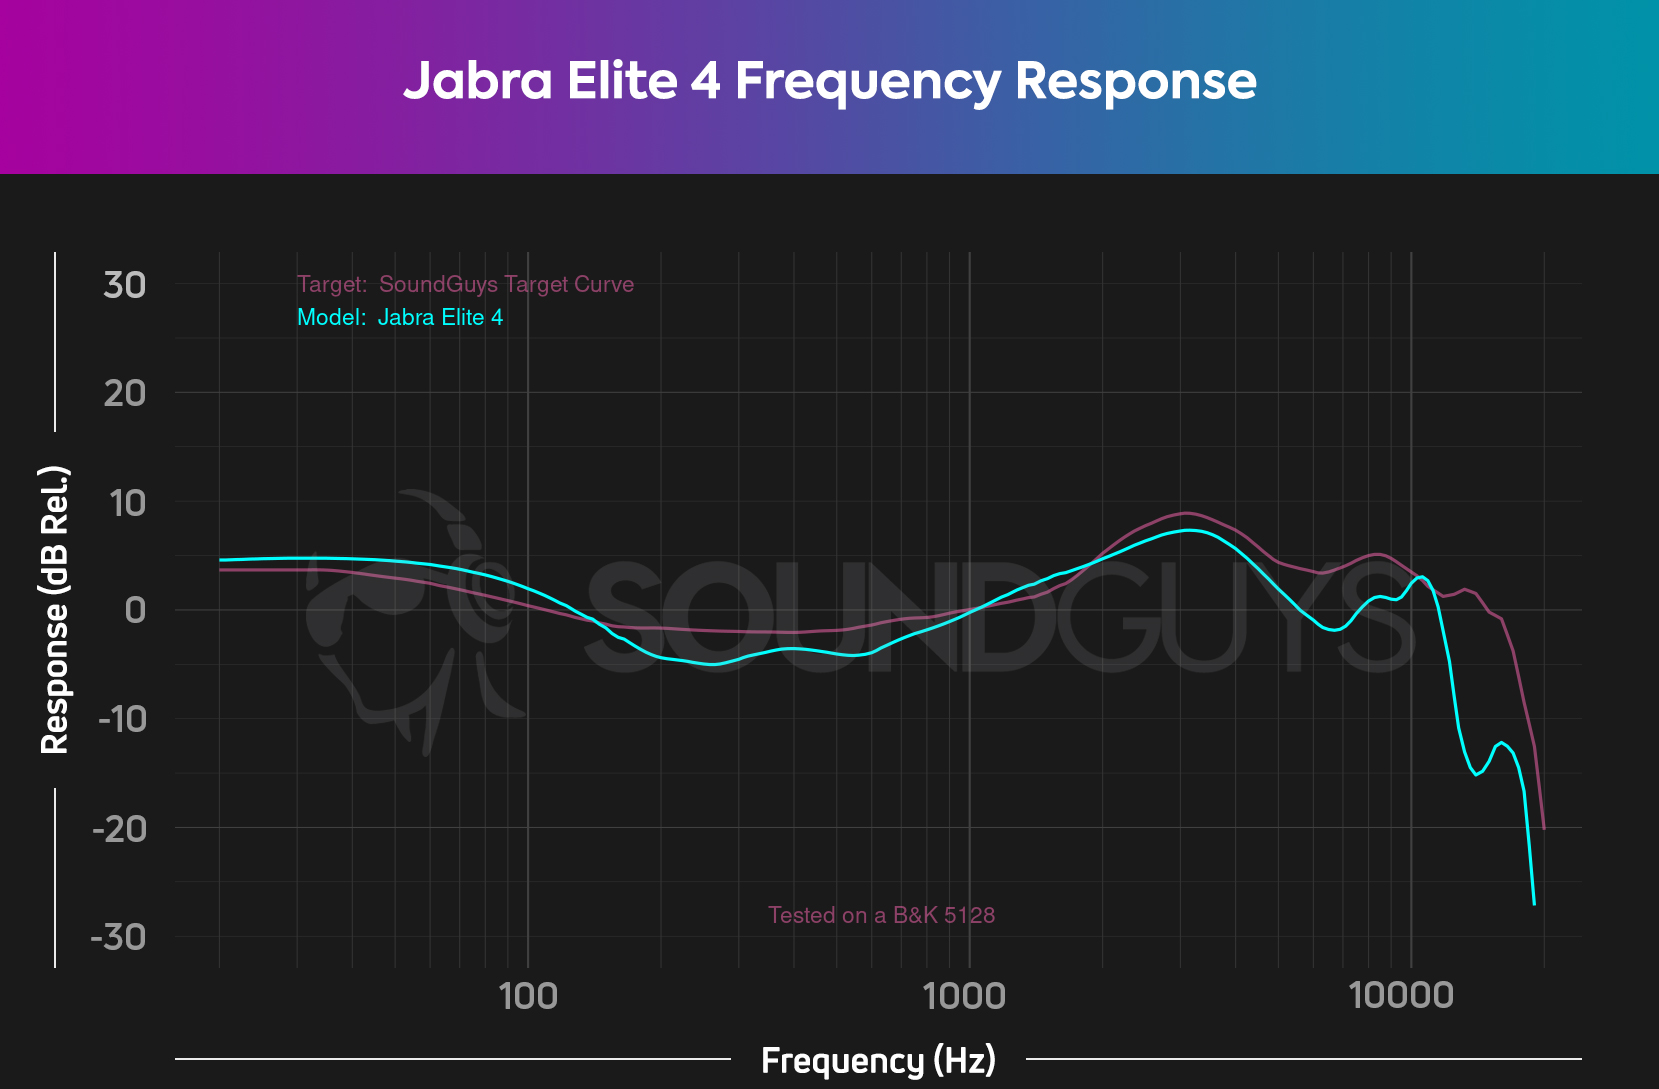 A charts compares the Jabra Elite 4 frequency response to the house curve.